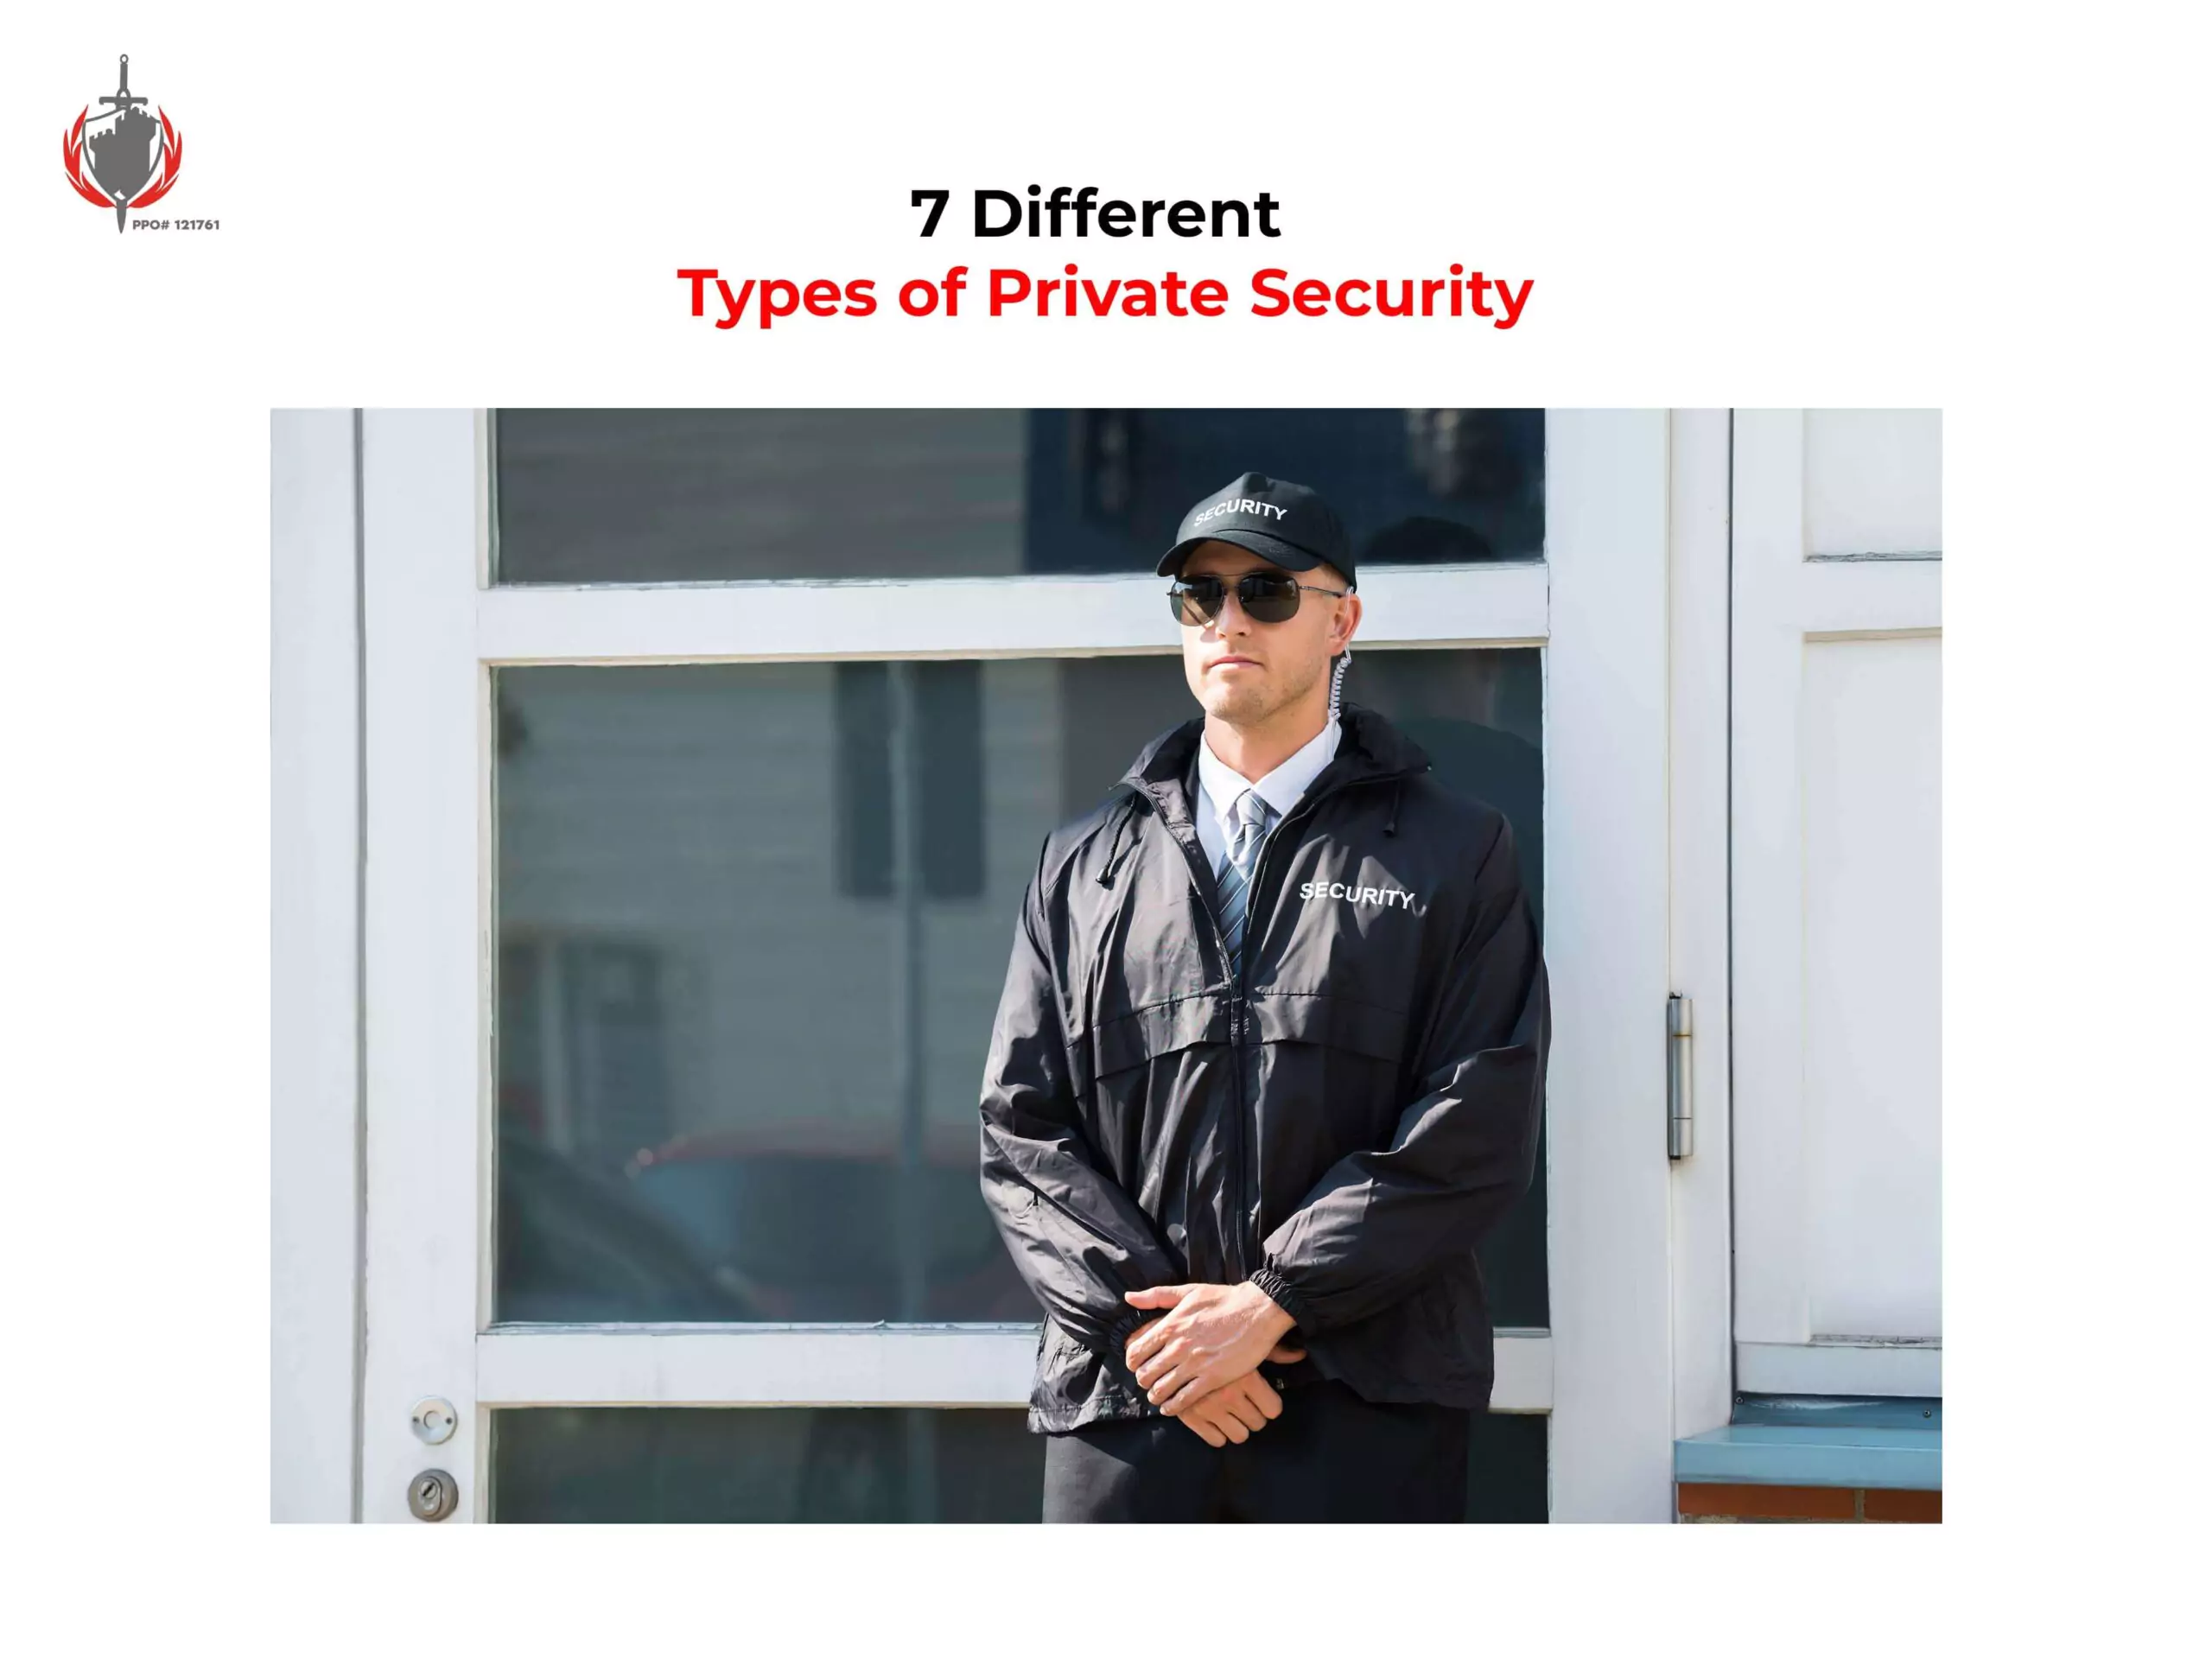 7 Different Types of Private Security